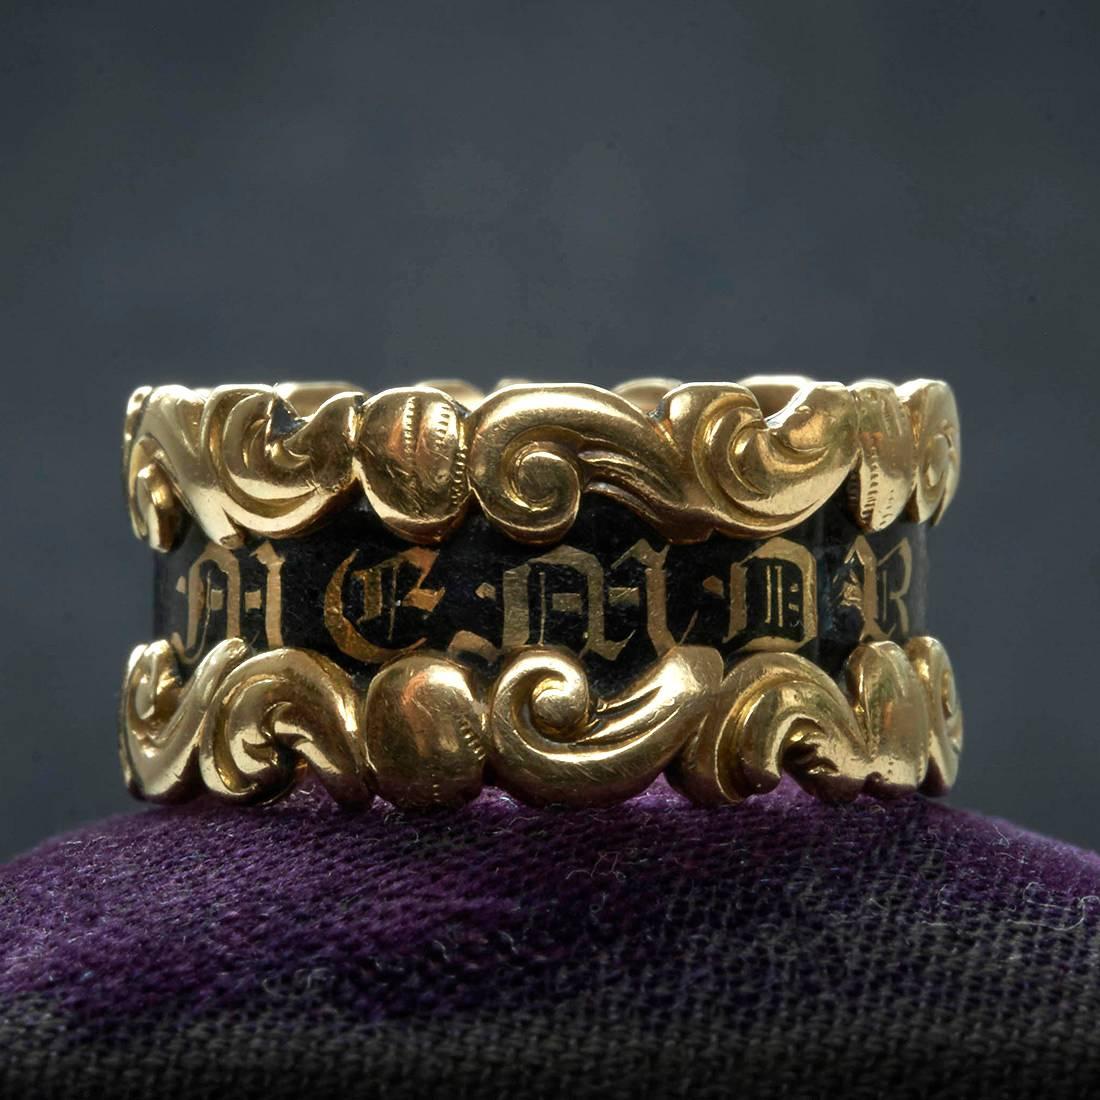 C.1829.  A beautiful Georgian era mourning ring. 
Inscribed around the outer band with ‘In memory of’ in gold and black enamel, and inside of the band reads, ‘Tho’ Kidder Ob 23 Nov. 1829’. Hallmarked 18k gold. In Very Good condition.

US Size: 6 1/4